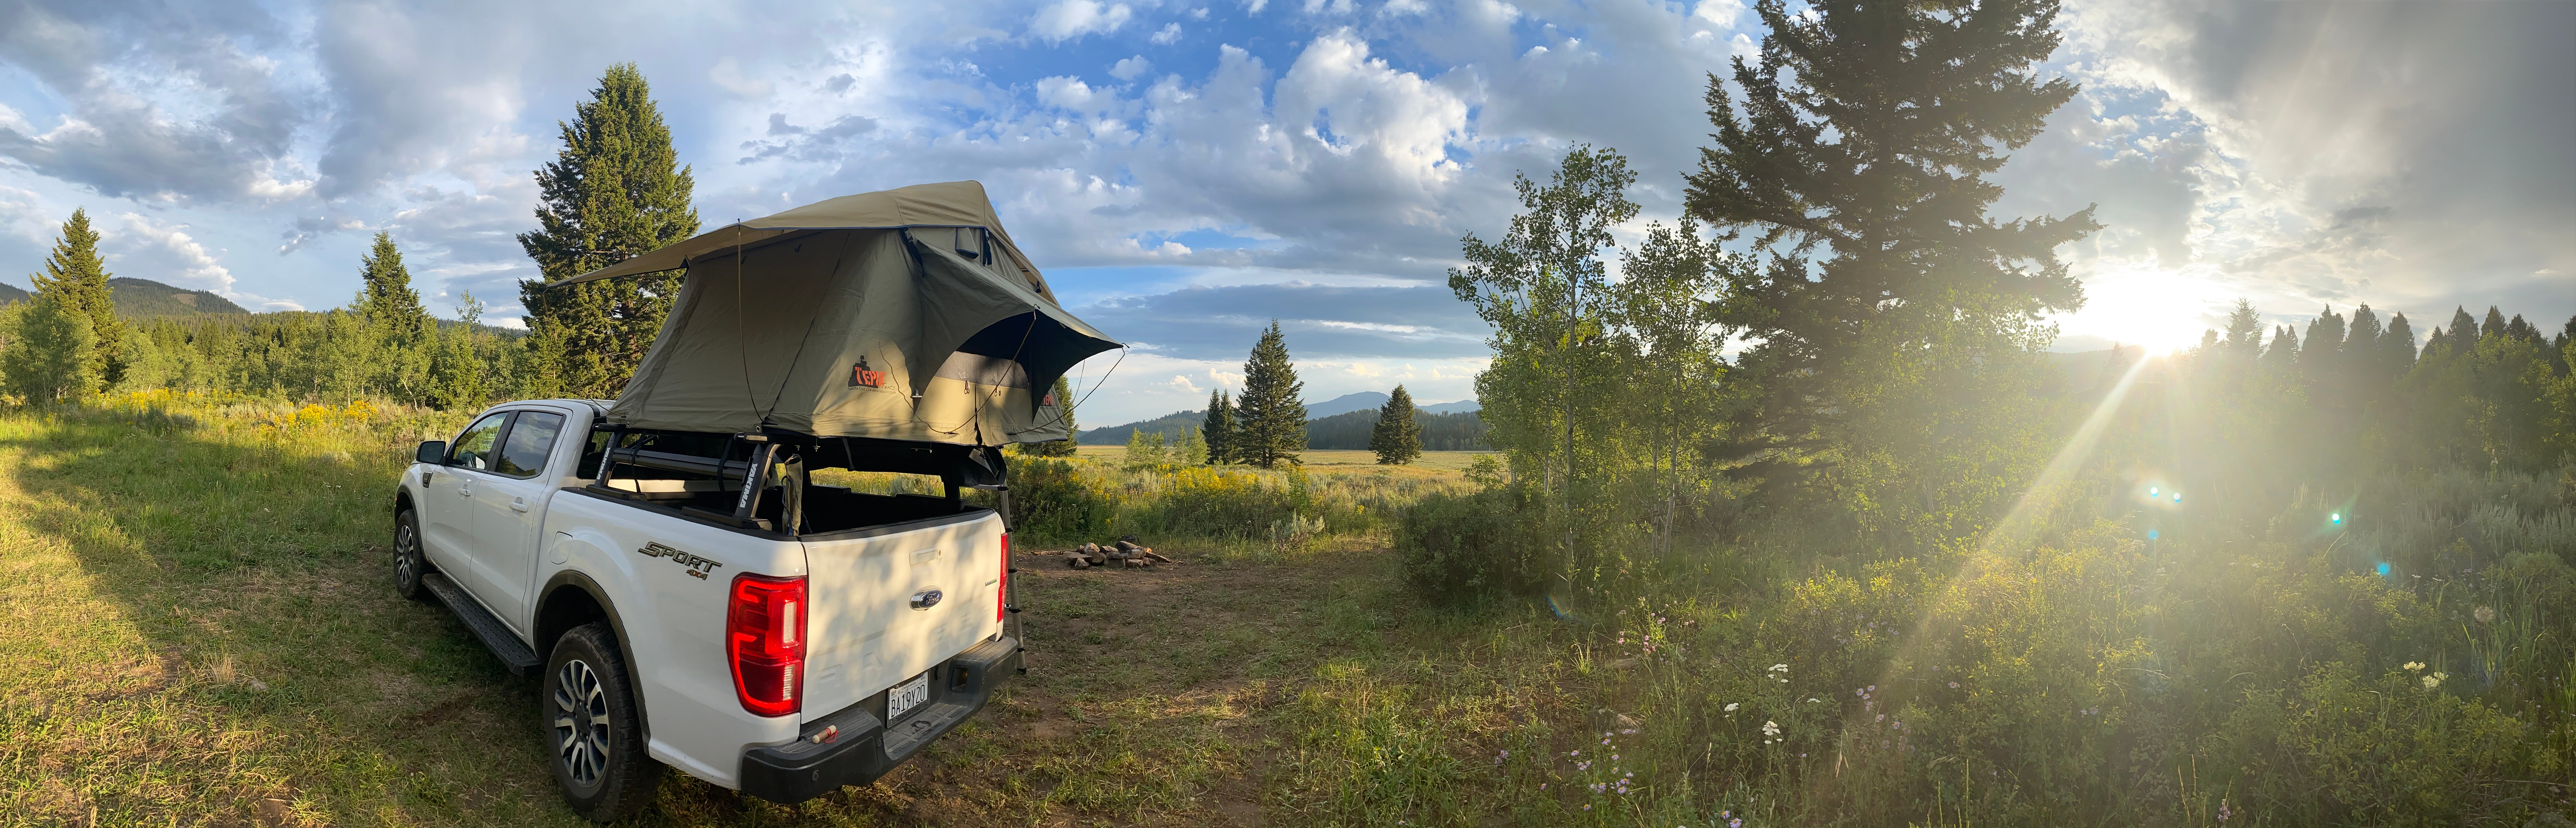 Camper submitted image from Targhee Creek - 3